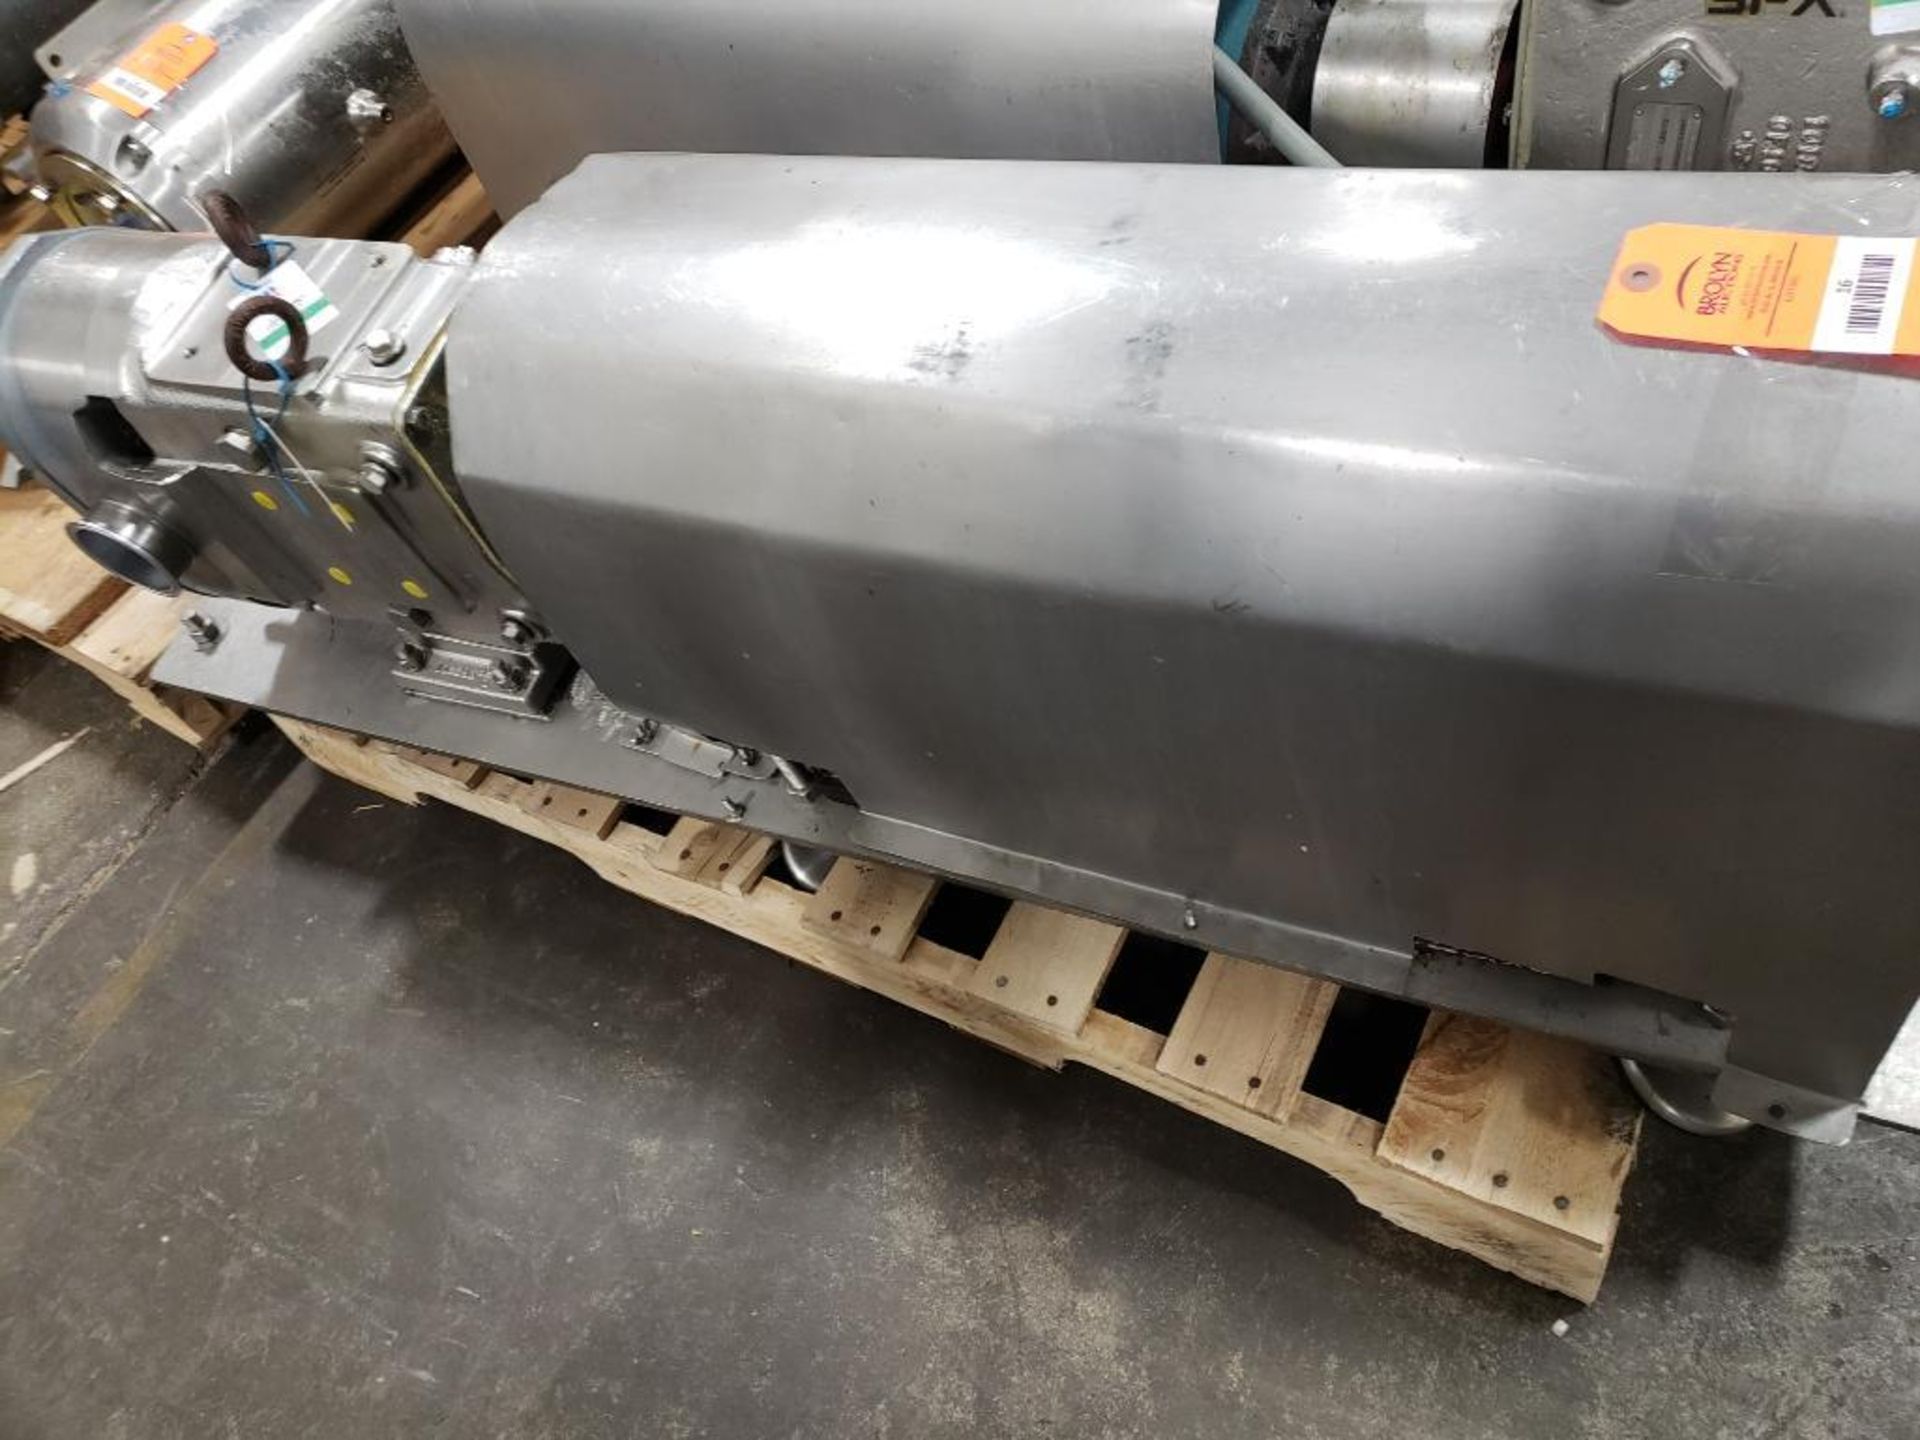 Waukesha Cherry Burrell positive displacement pump. Model 130. Includes gearbox and motor.